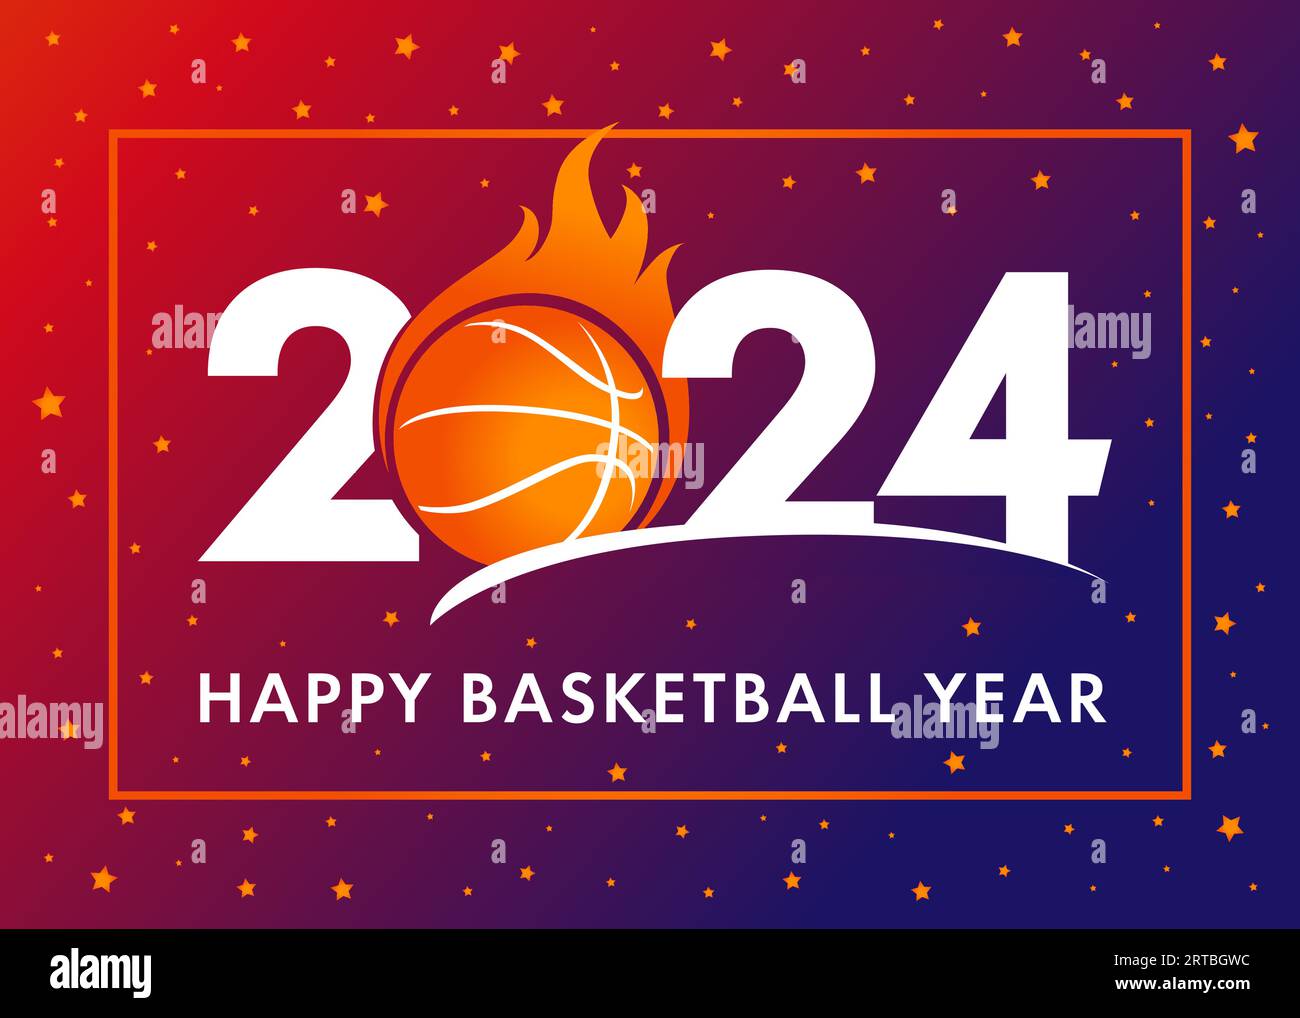 Happy Basketball Year 2024. Sport symbol with basketball ball in flame for New Year banner, greeting card or holiday tournament invitation. Vector Stock Vector